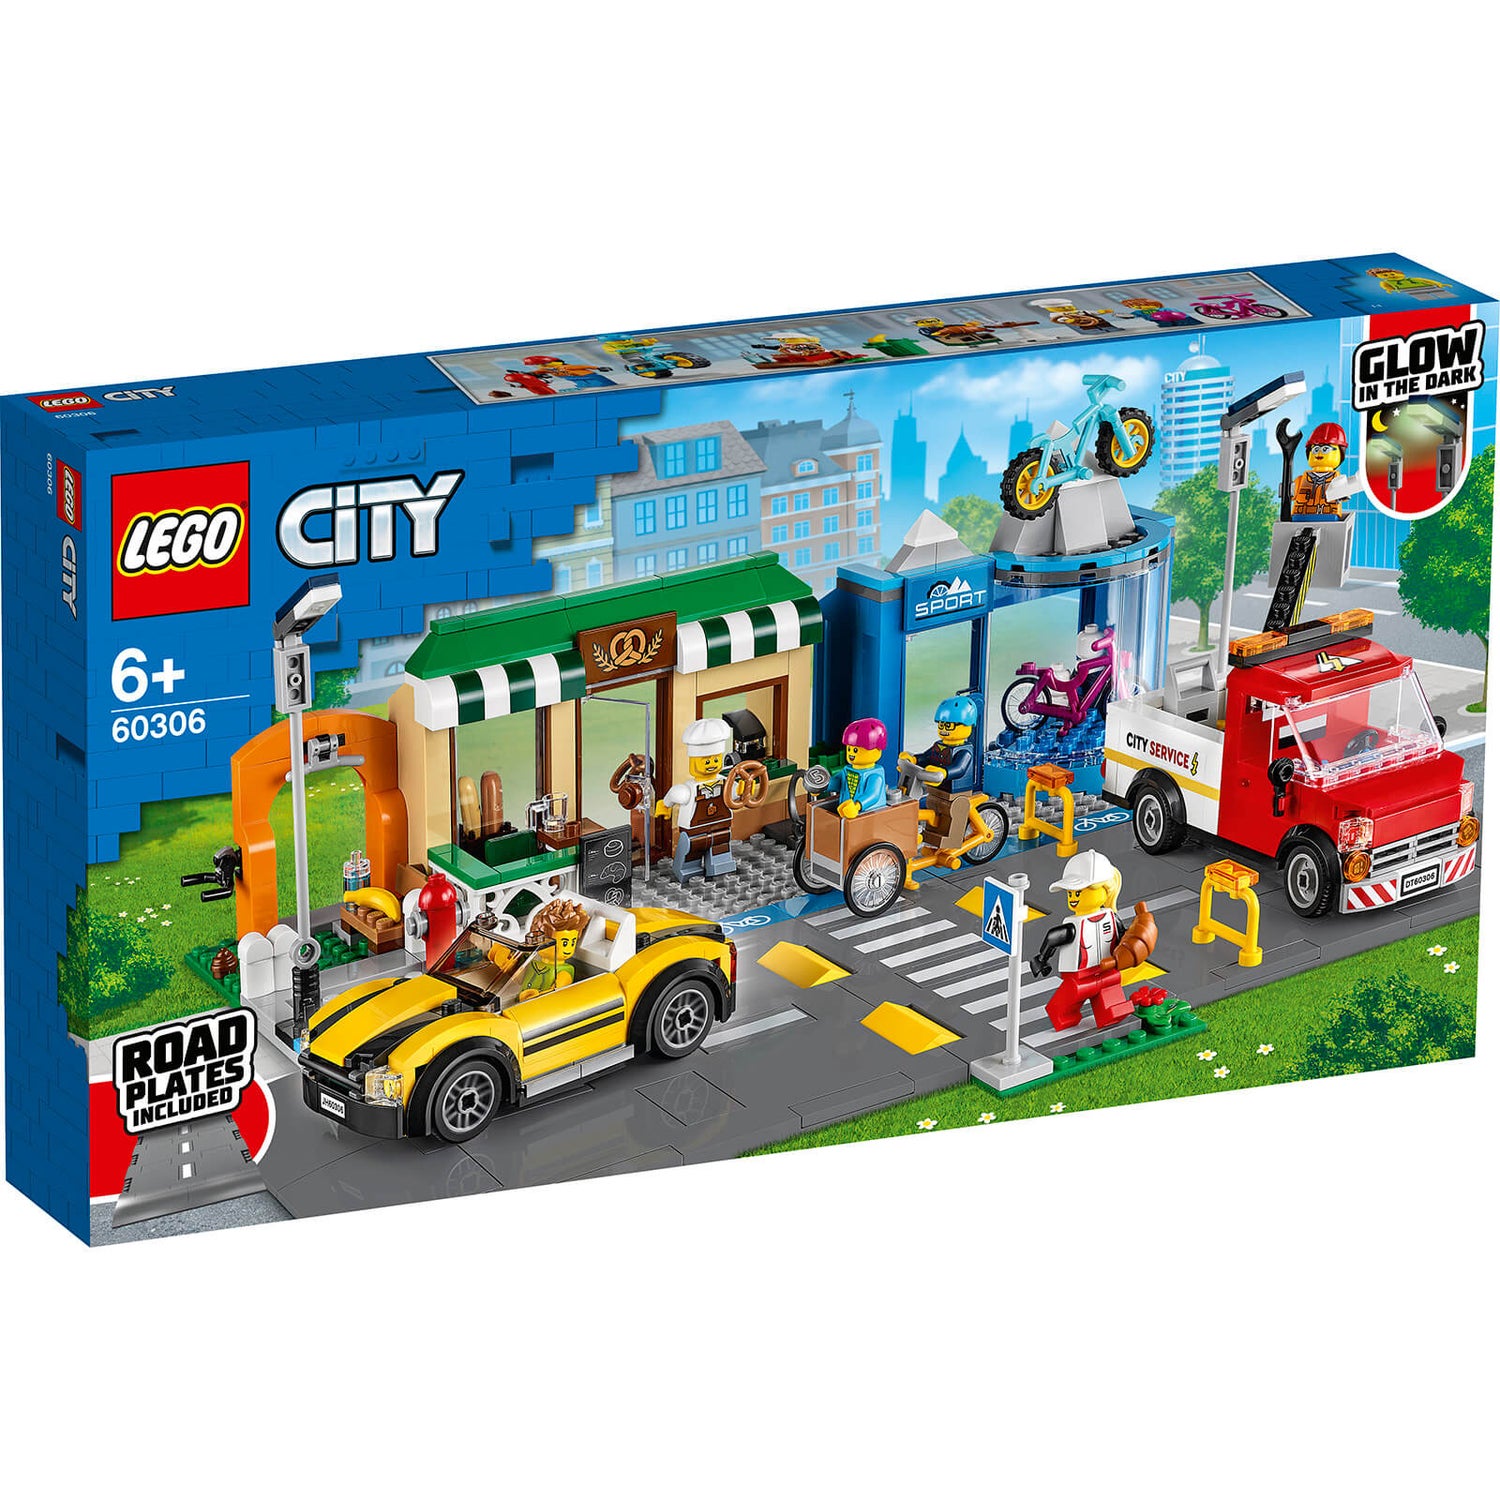 LEGO City: Great Vehicles and Road Plates Building Set (60306)